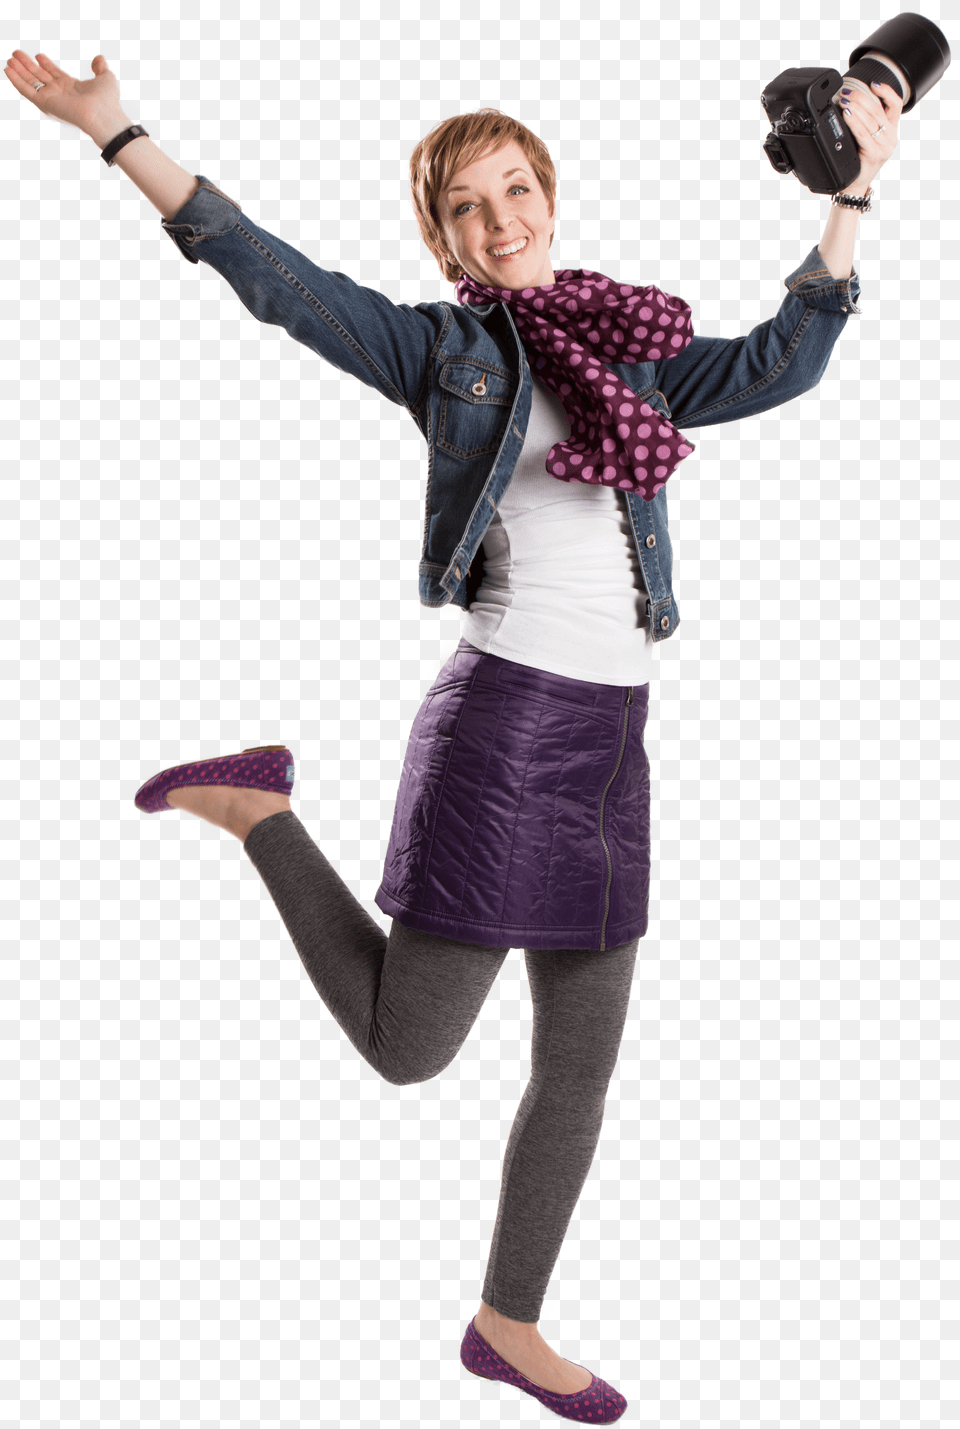 Jumping Png